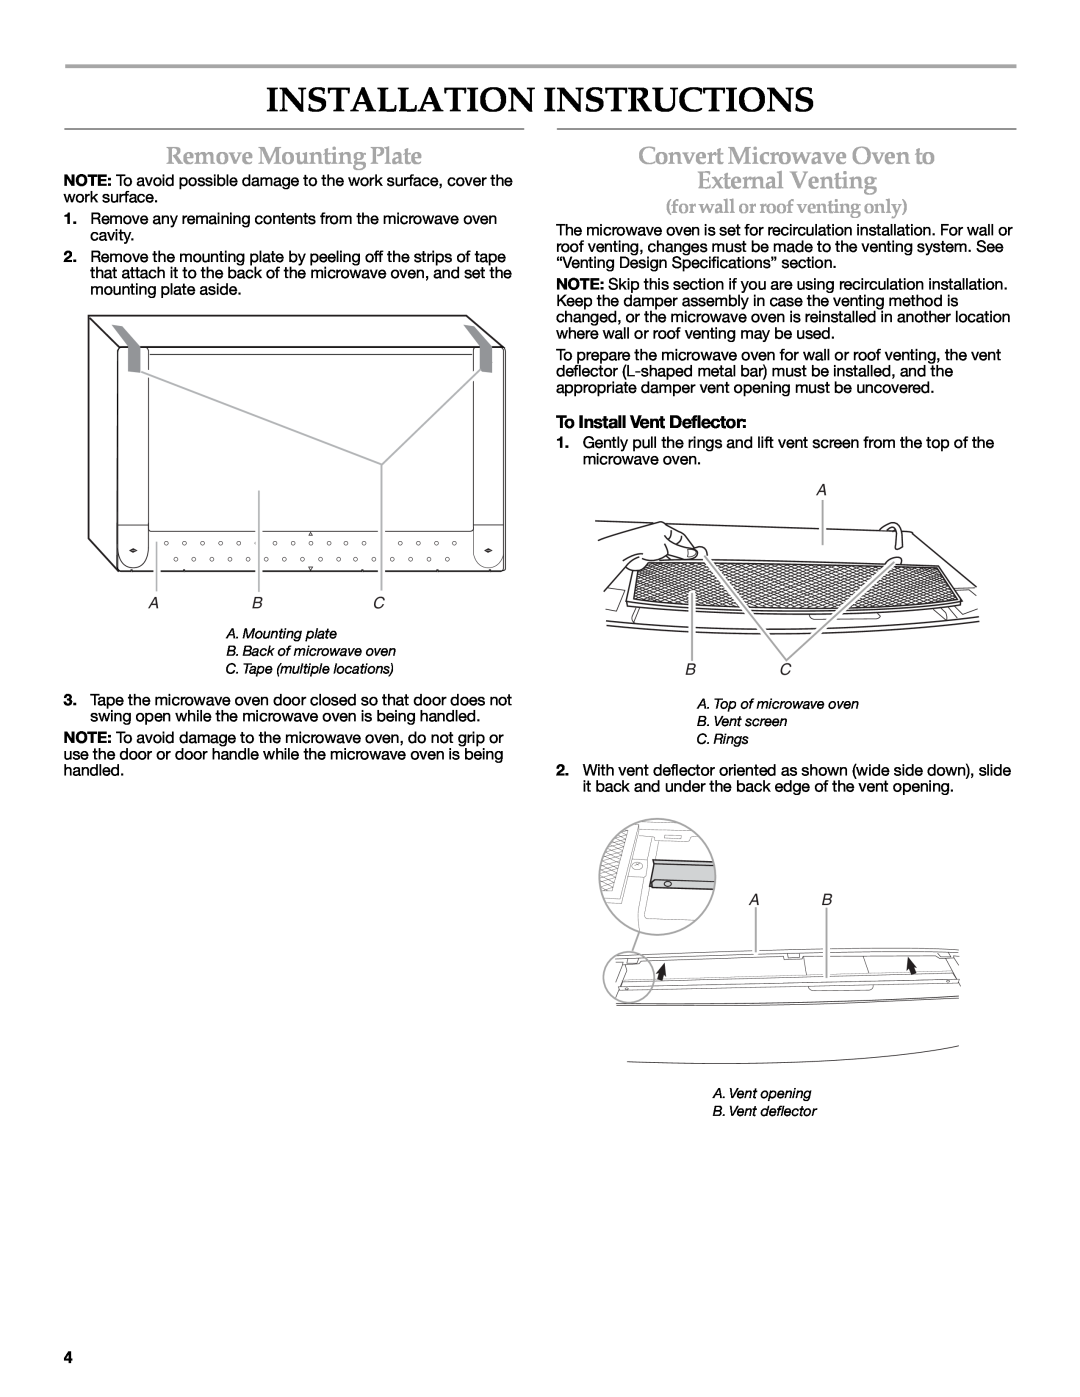 KitchenAid W10190011A Installation Instructions, Remove Mounting Plate, Convert Microwave Oven to External Venting, A B C 